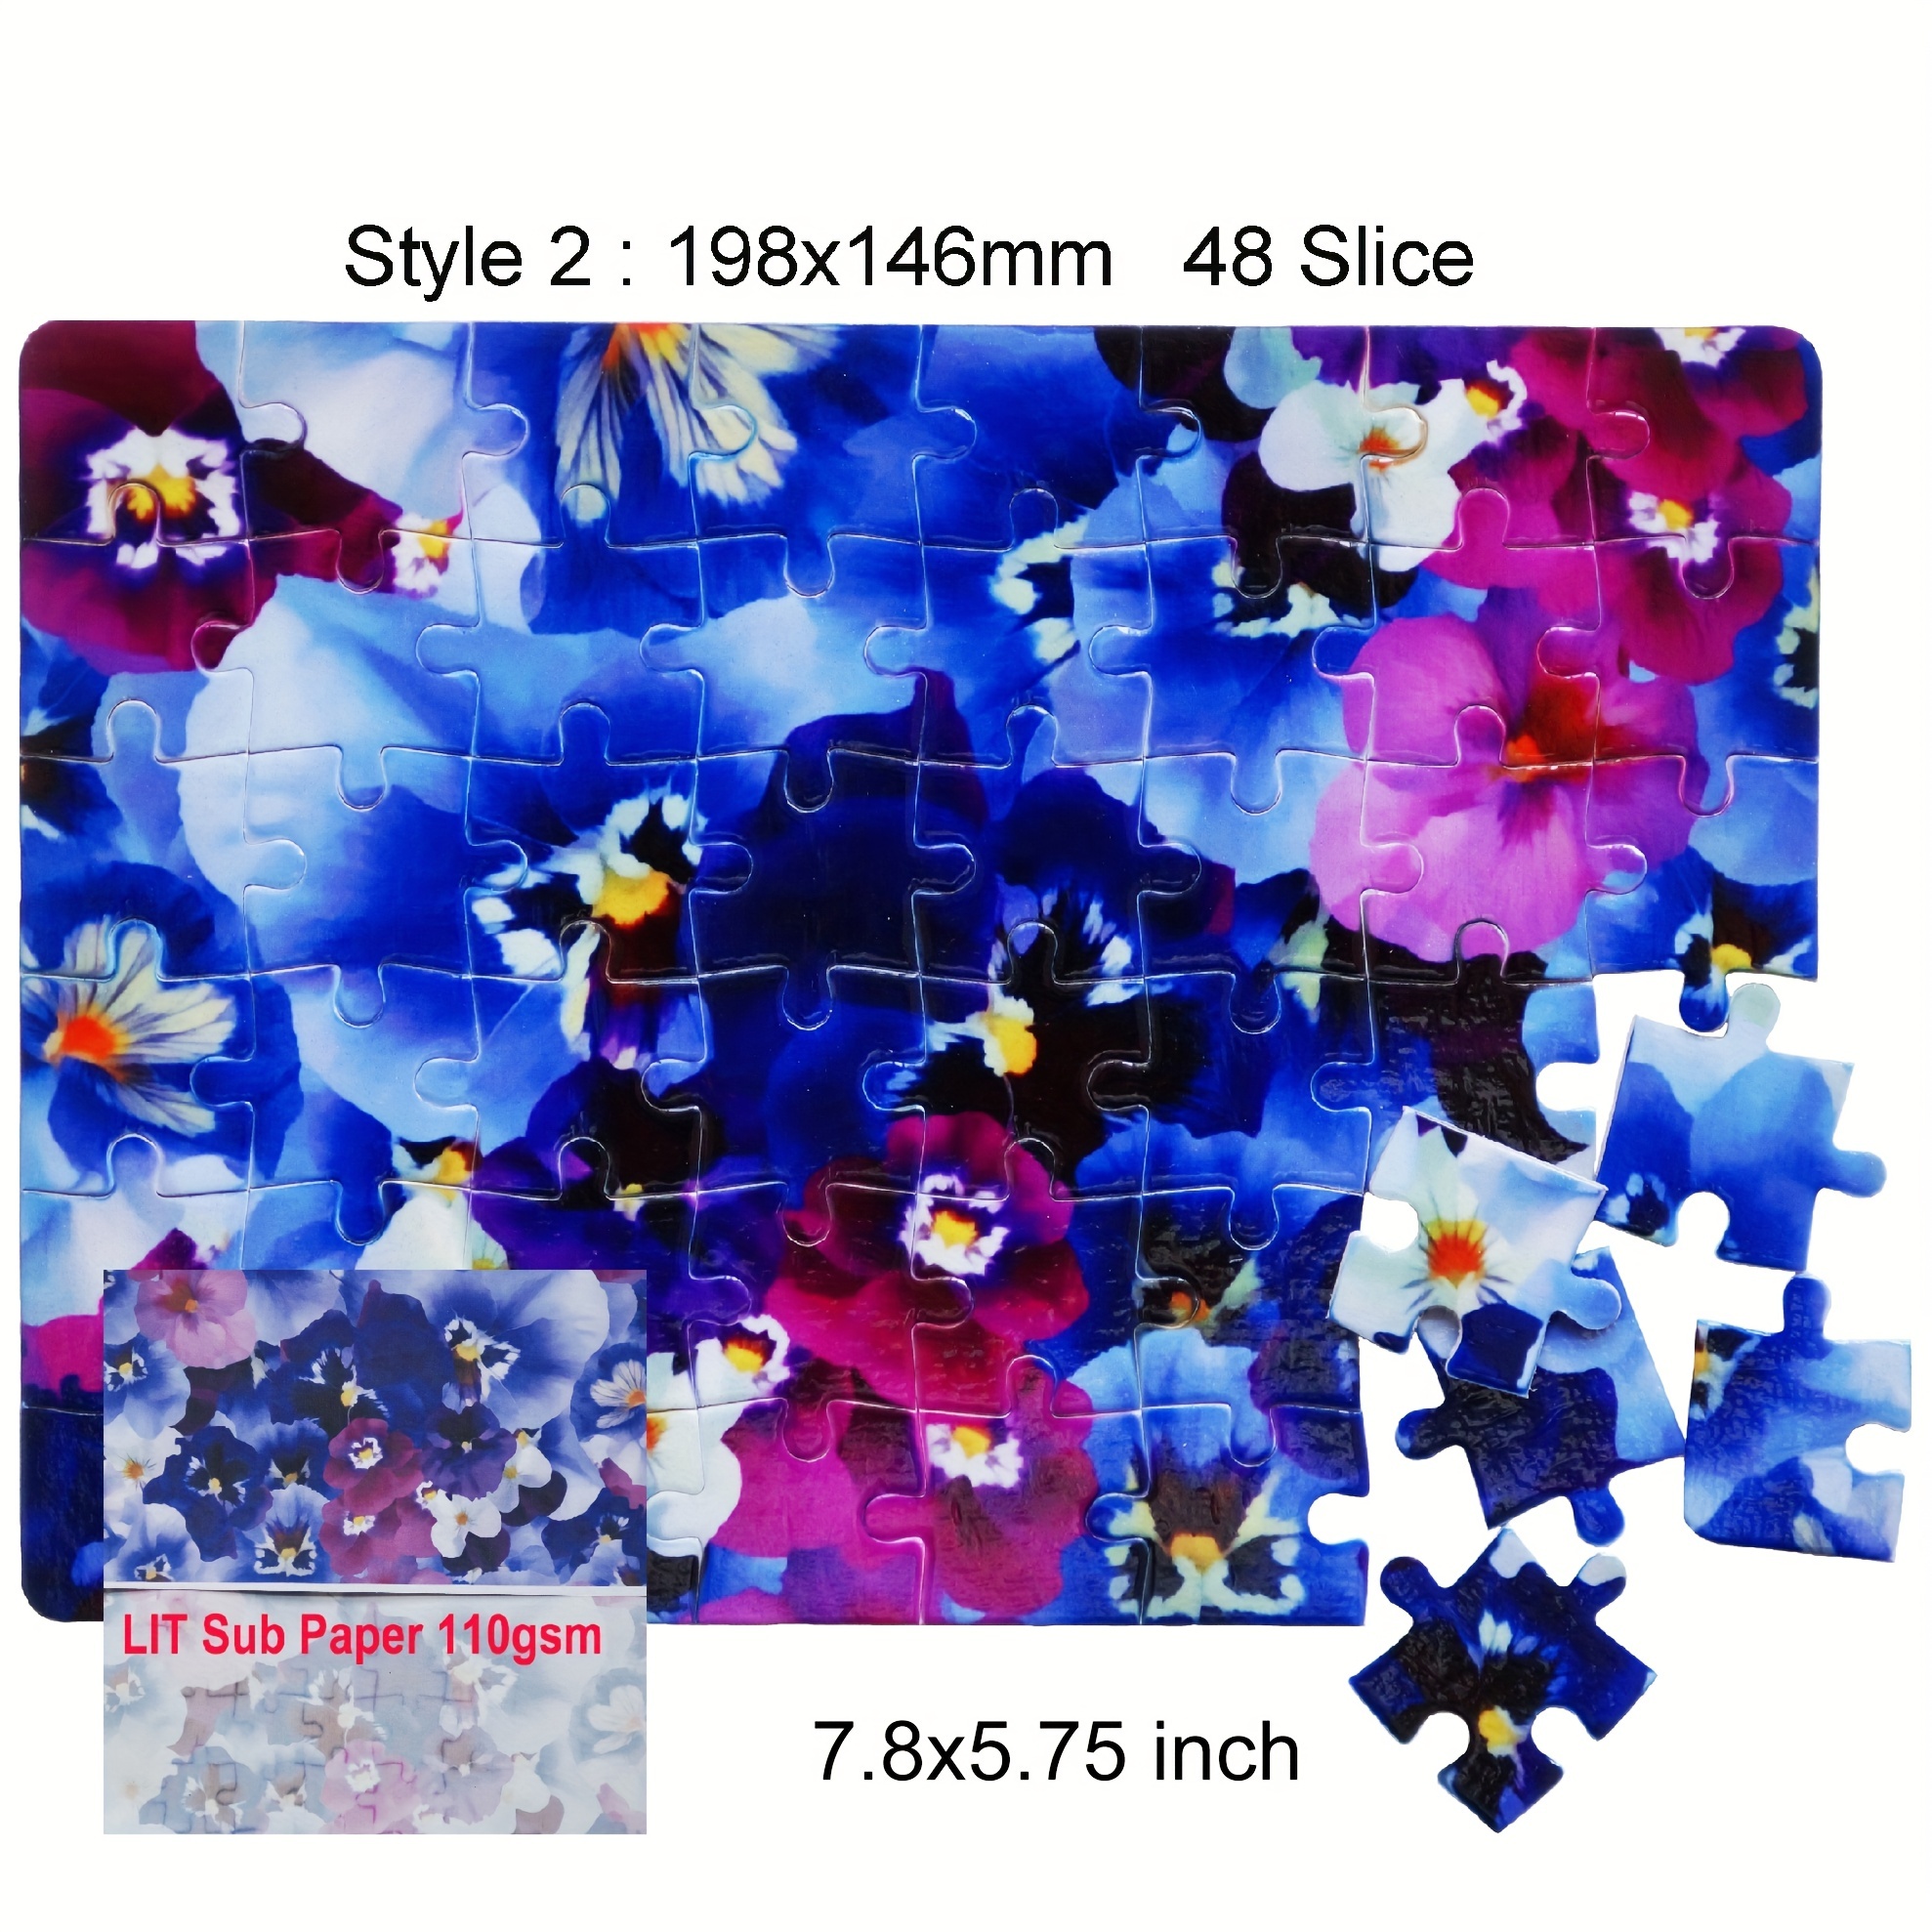 30-Piece Jigsaw Puzzle for Sublimation Printing (5/pack)